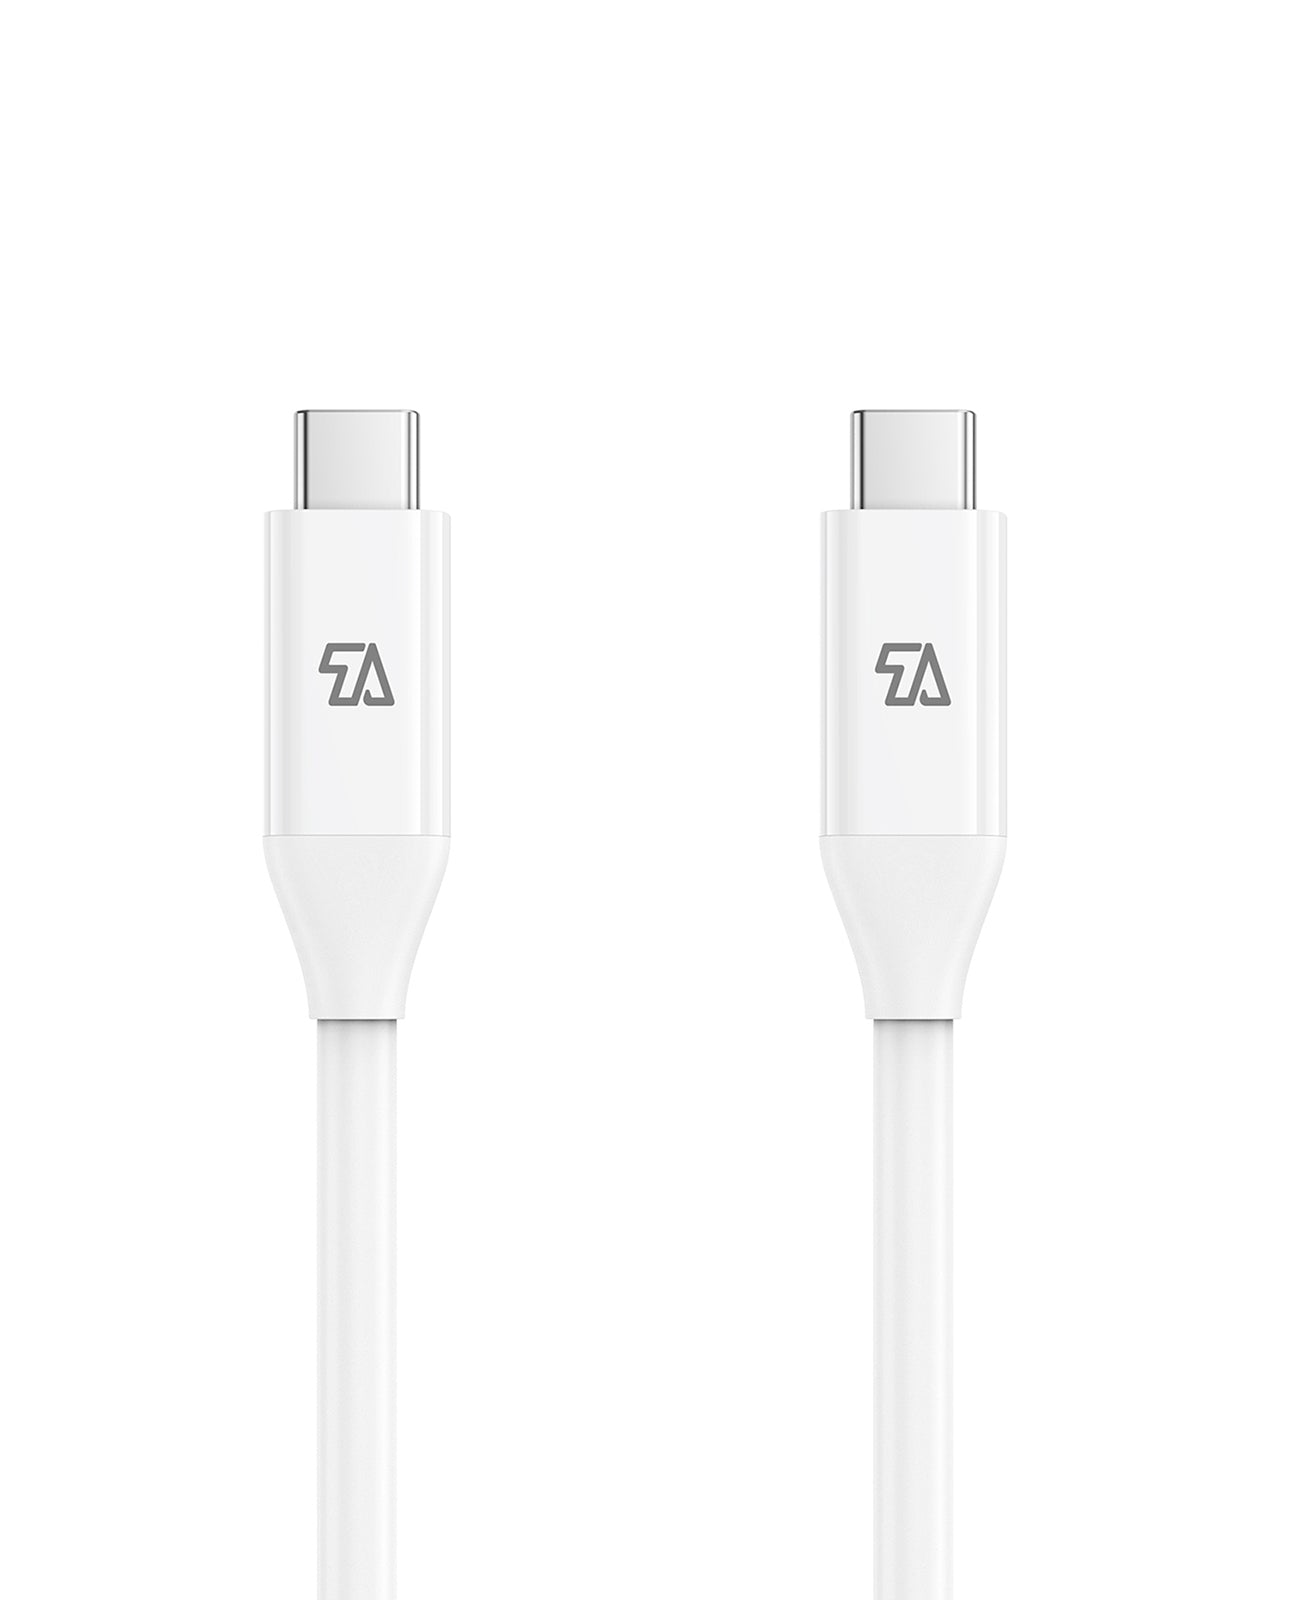 DisplayPort 1.4 Male to Male Cable, 6.6FT/2M – teleadapt